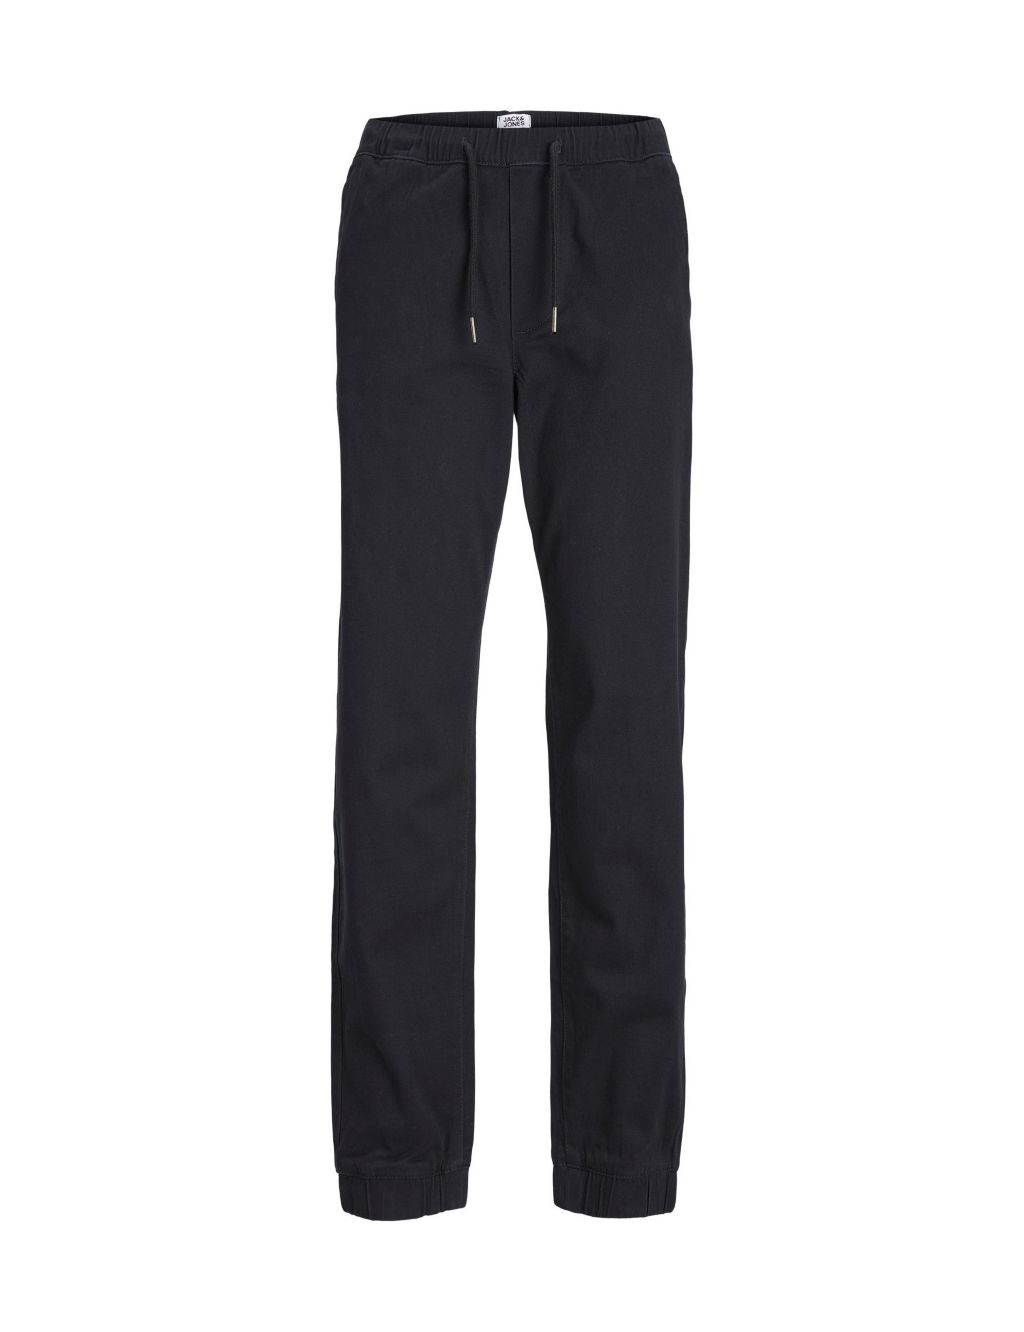 Cotton Rich Elasticated Waist Joggers (8-16 Yrs) image 2